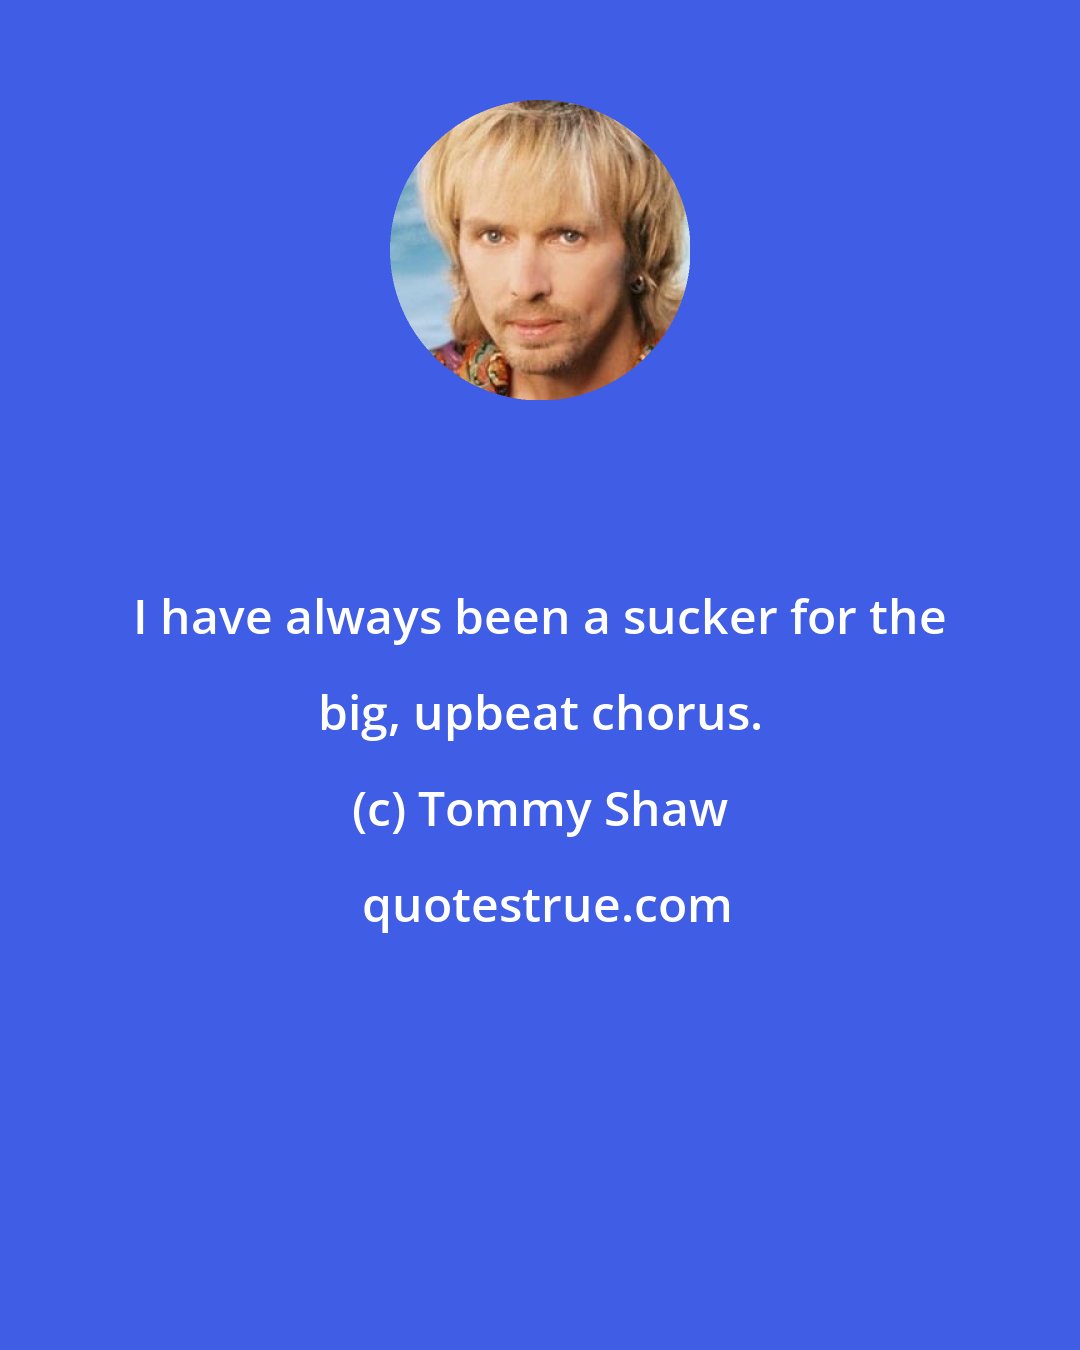 Tommy Shaw: I have always been a sucker for the big, upbeat chorus.